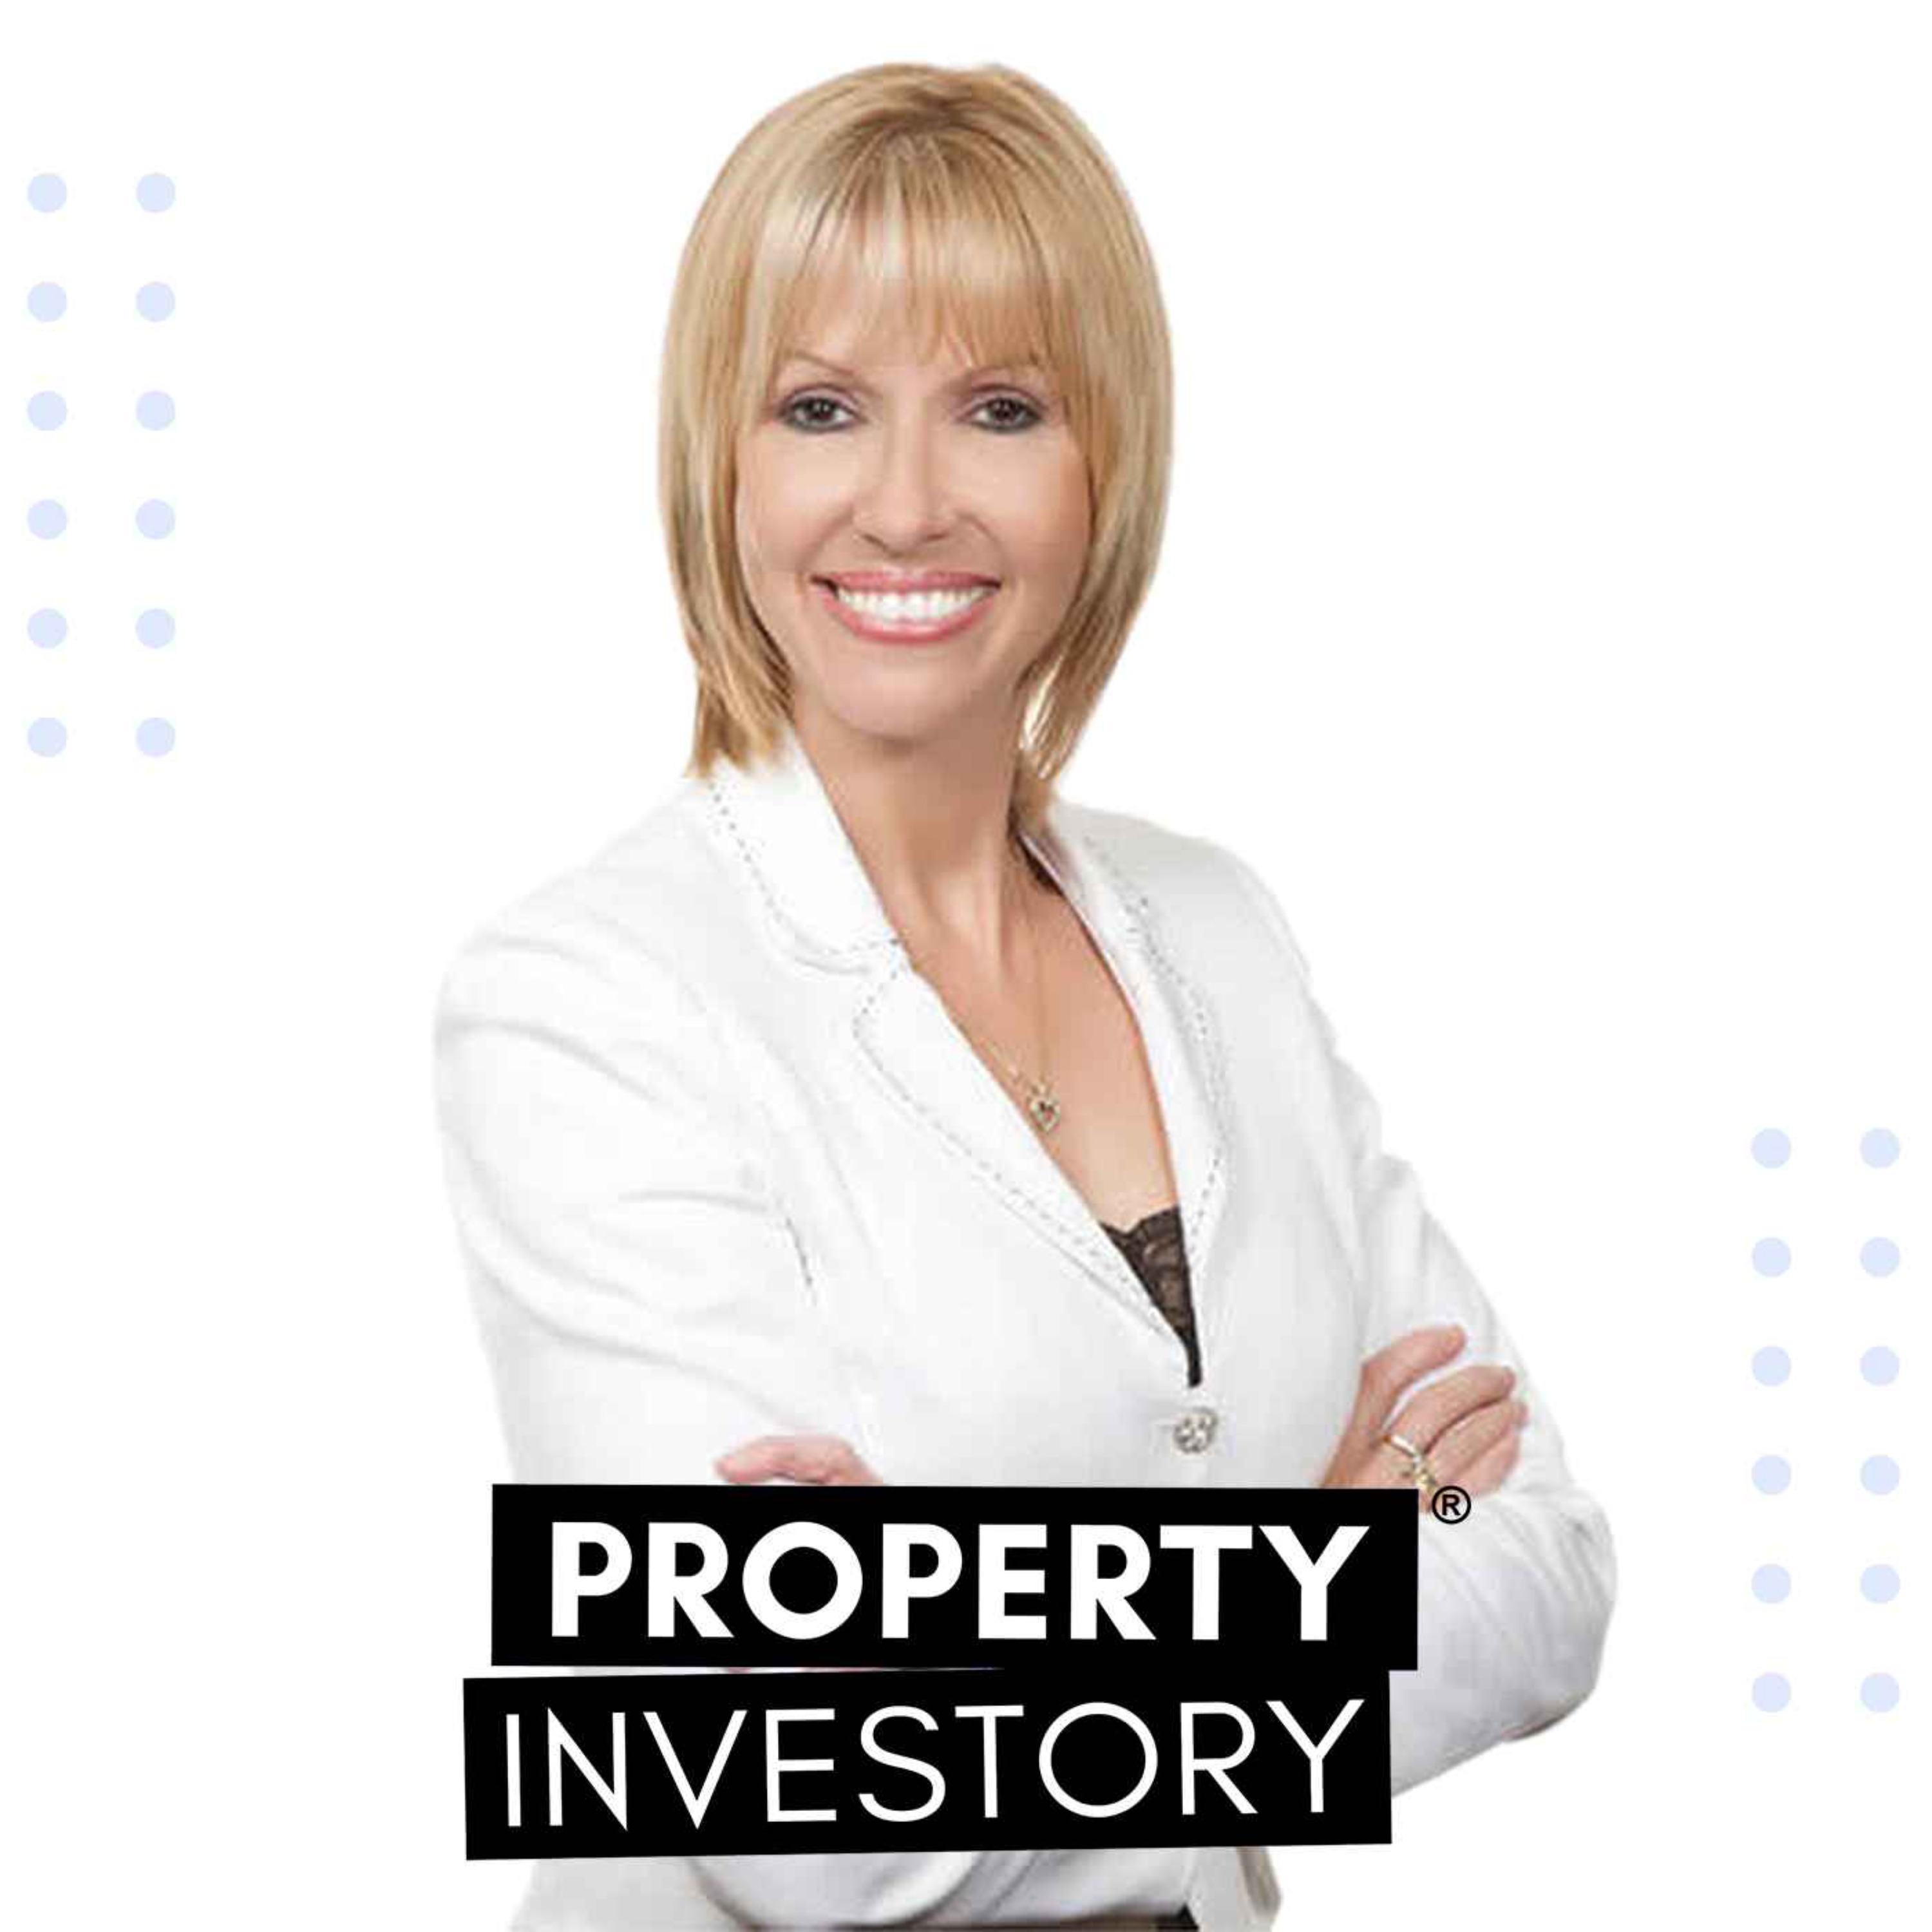 20 Questions: Pick Properties For Growth With Margaret Lomas